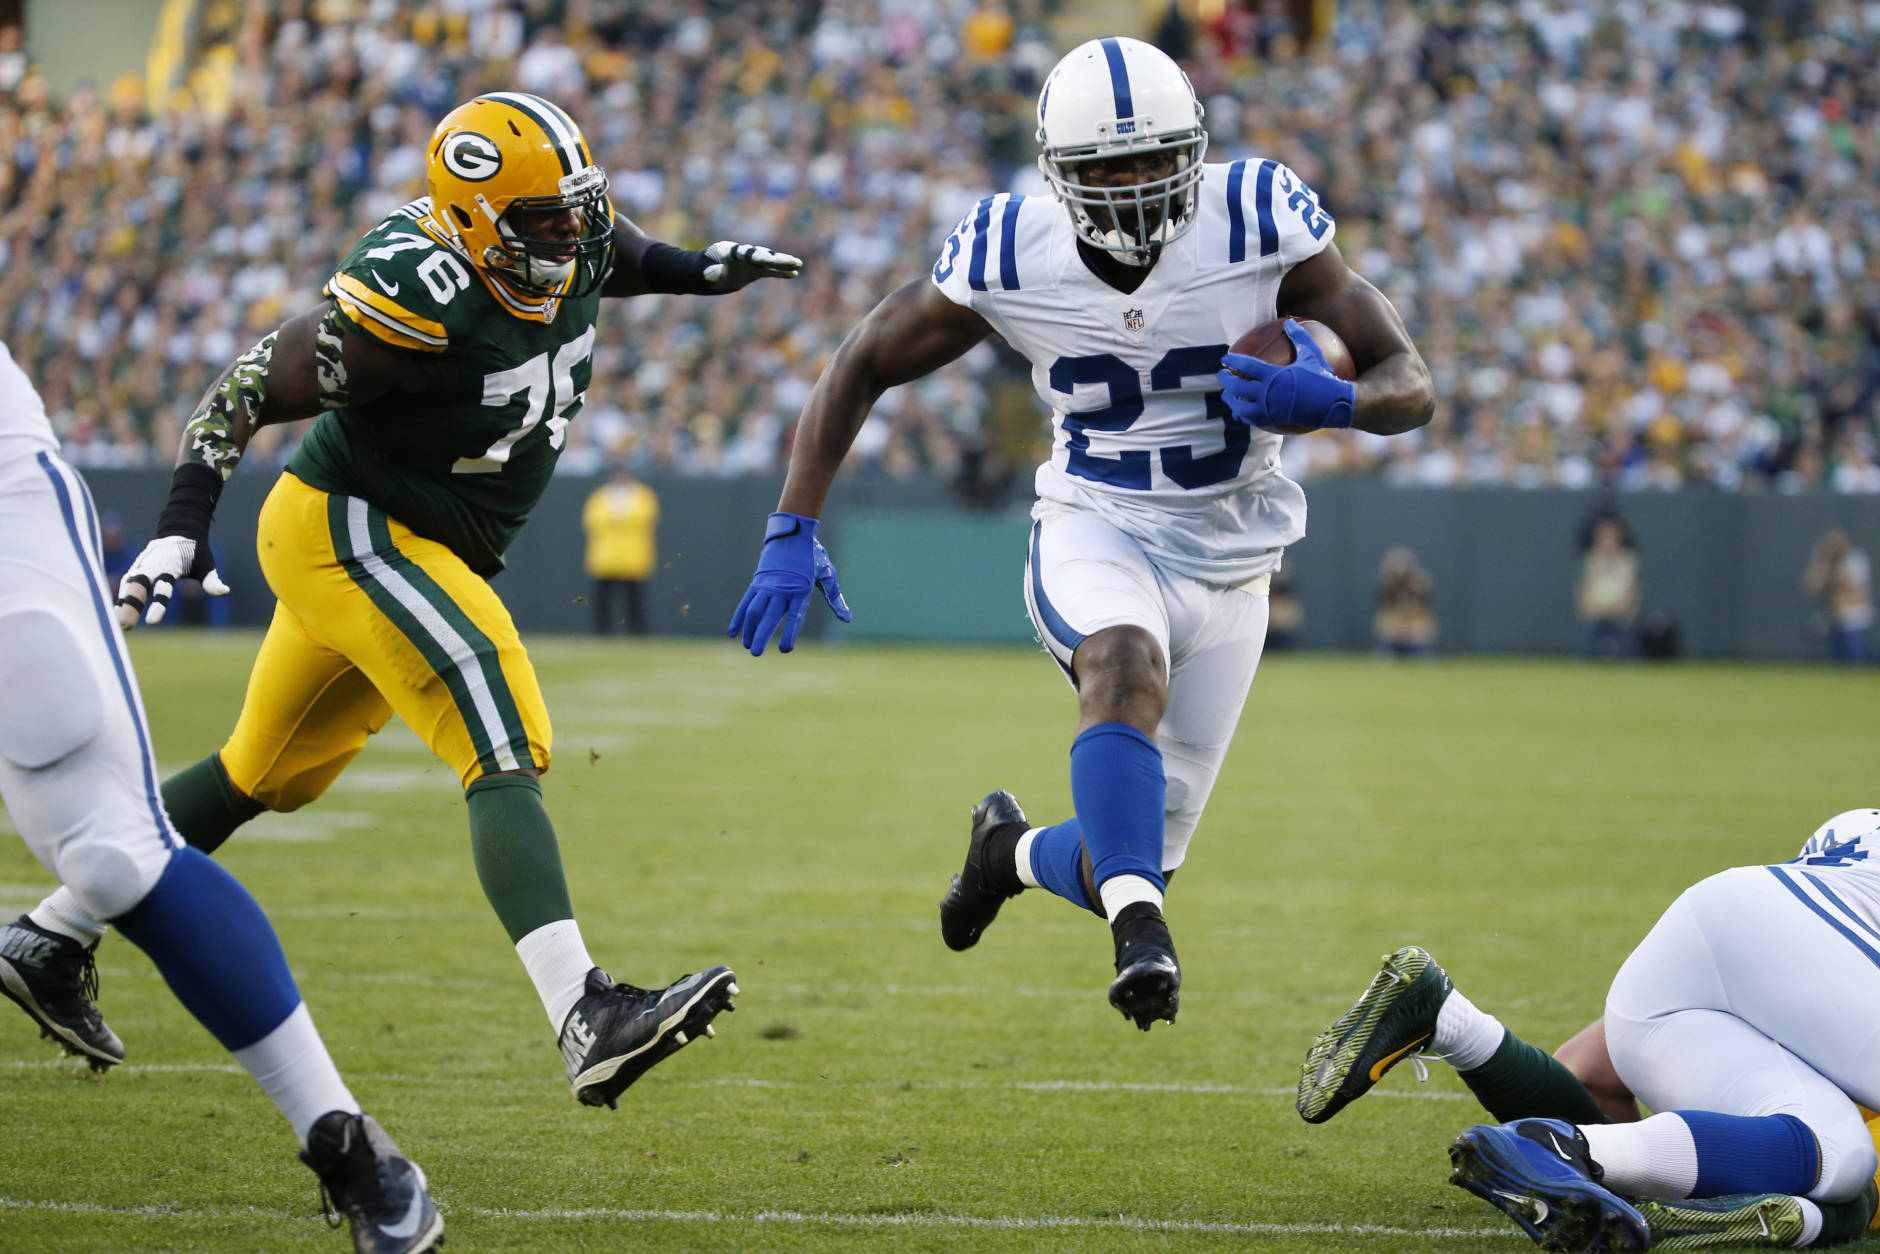 Indianapolis Colts' Frank Gore runs past Green Bay Packers' Mike Daniels for a touchdown during the first half of an NFL football game Sunday, Nov. 6, 2016, in Green Bay, Wis. (AP Photo/Mike Roemer)